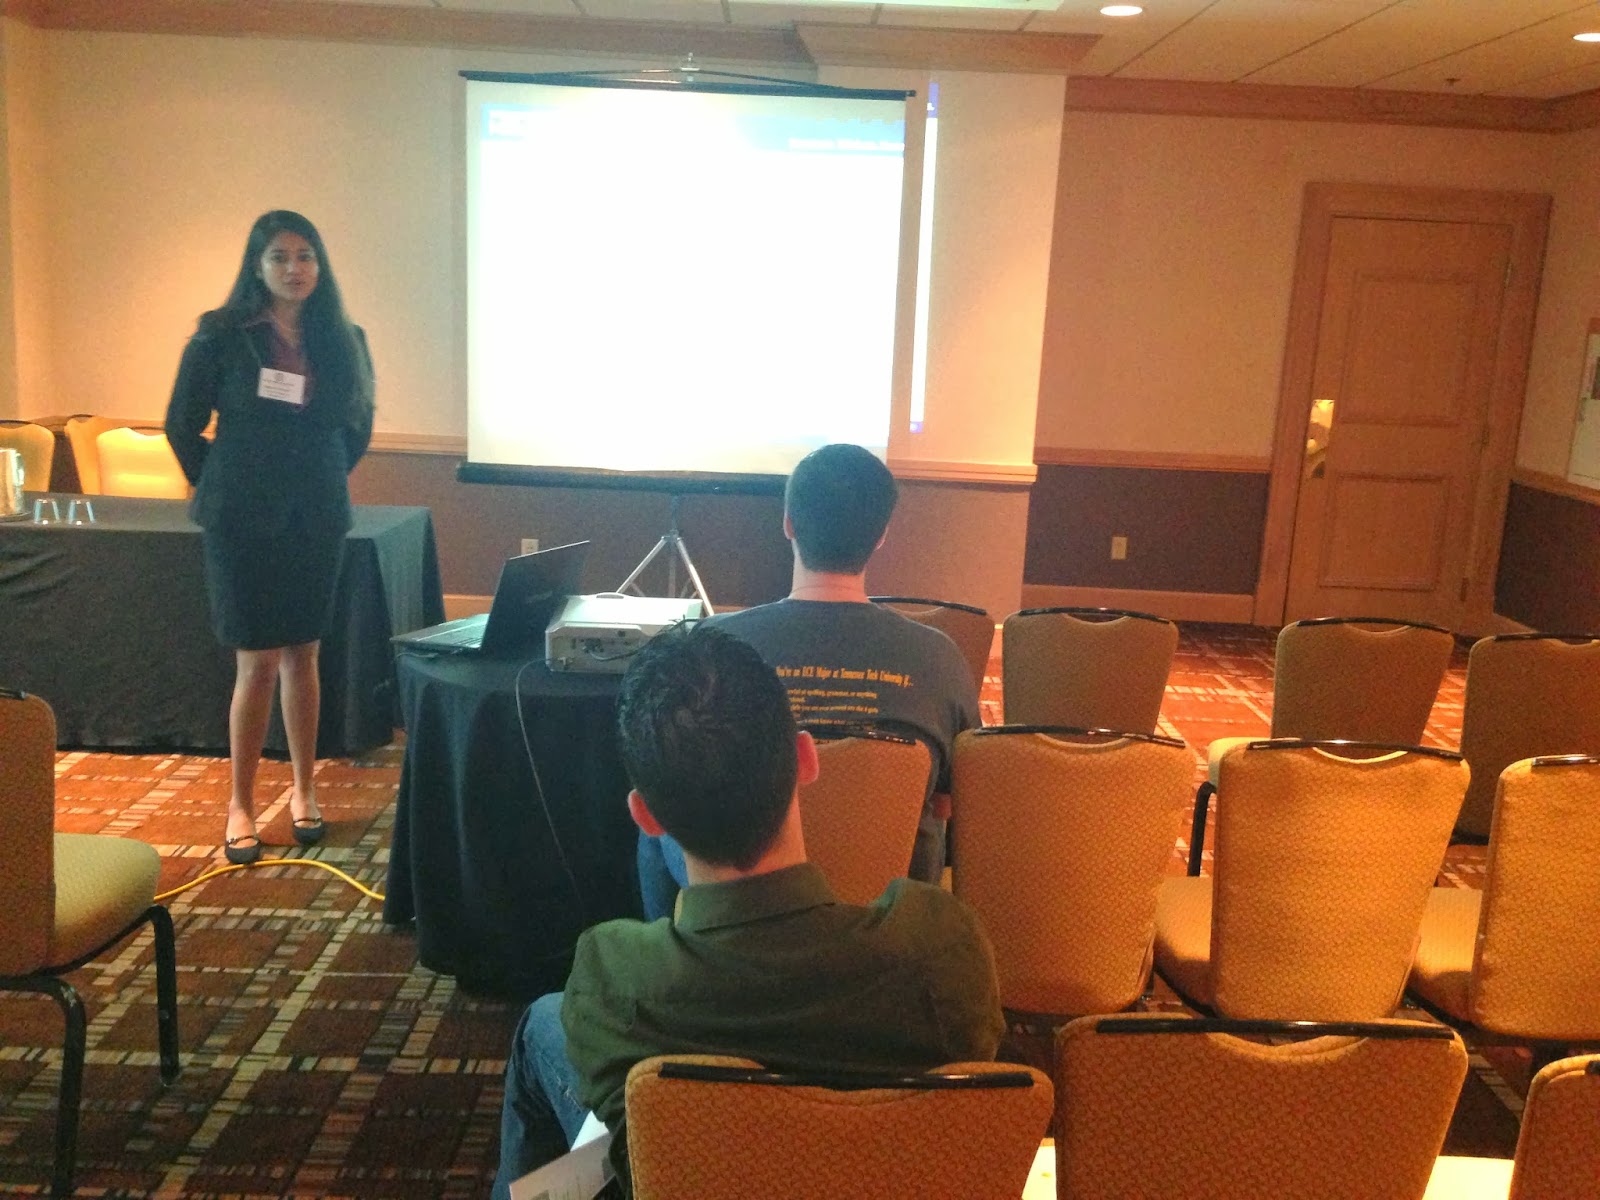 EPES Lab Members are presenting papers at the IEEE SoutheastCon held at Jacksonville, Florida, USA, April 4-7, 2013